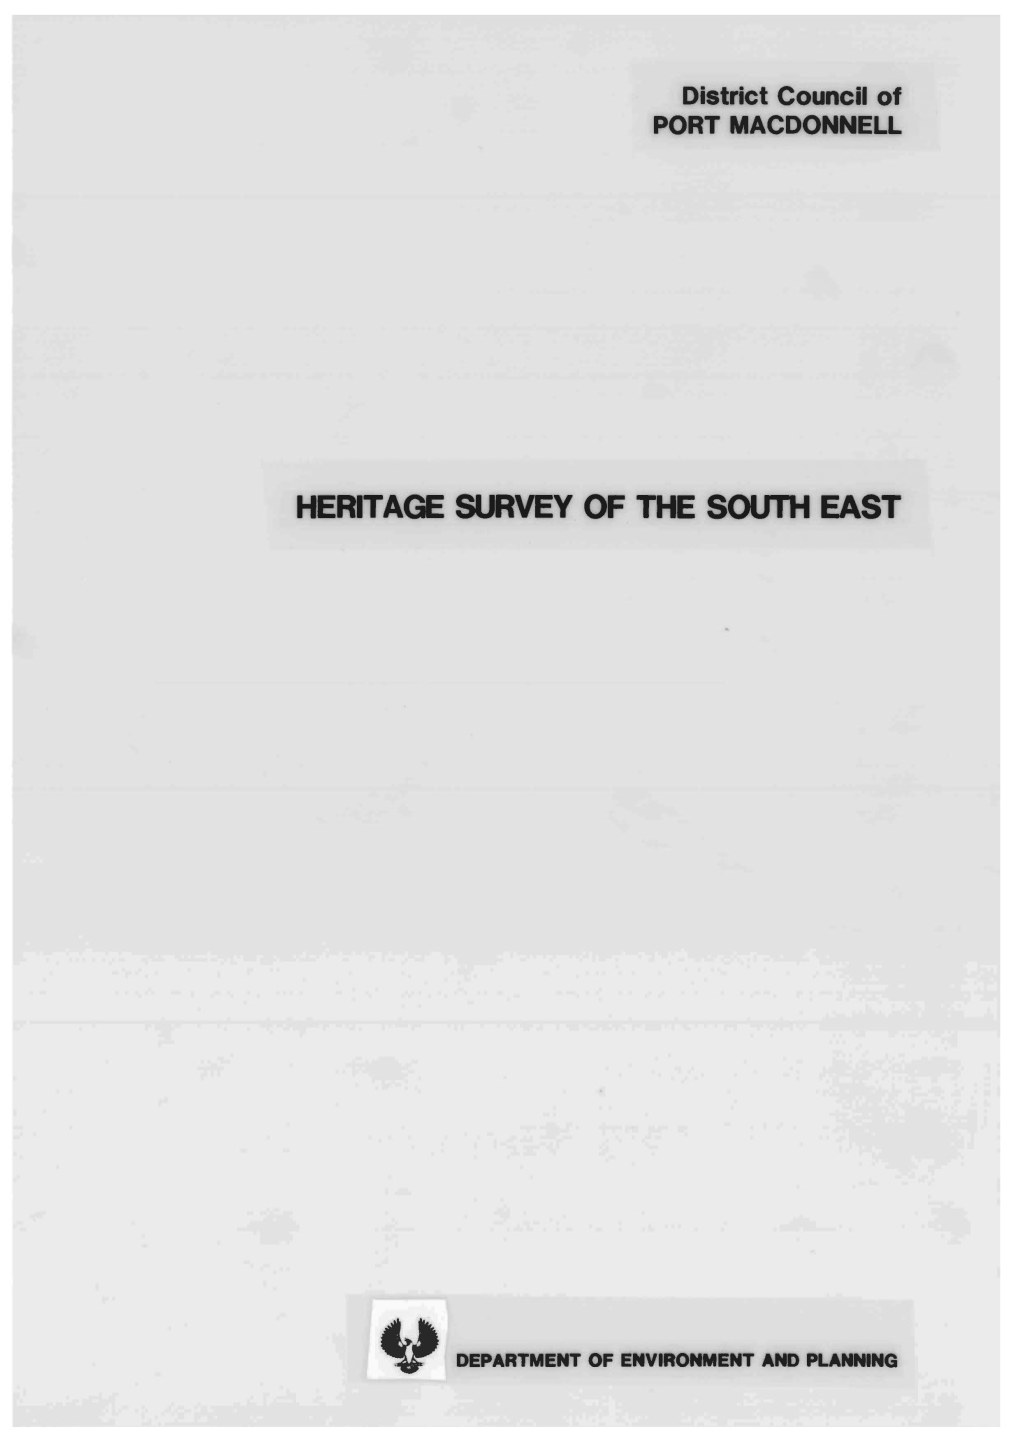 Heritage Survey of the South East